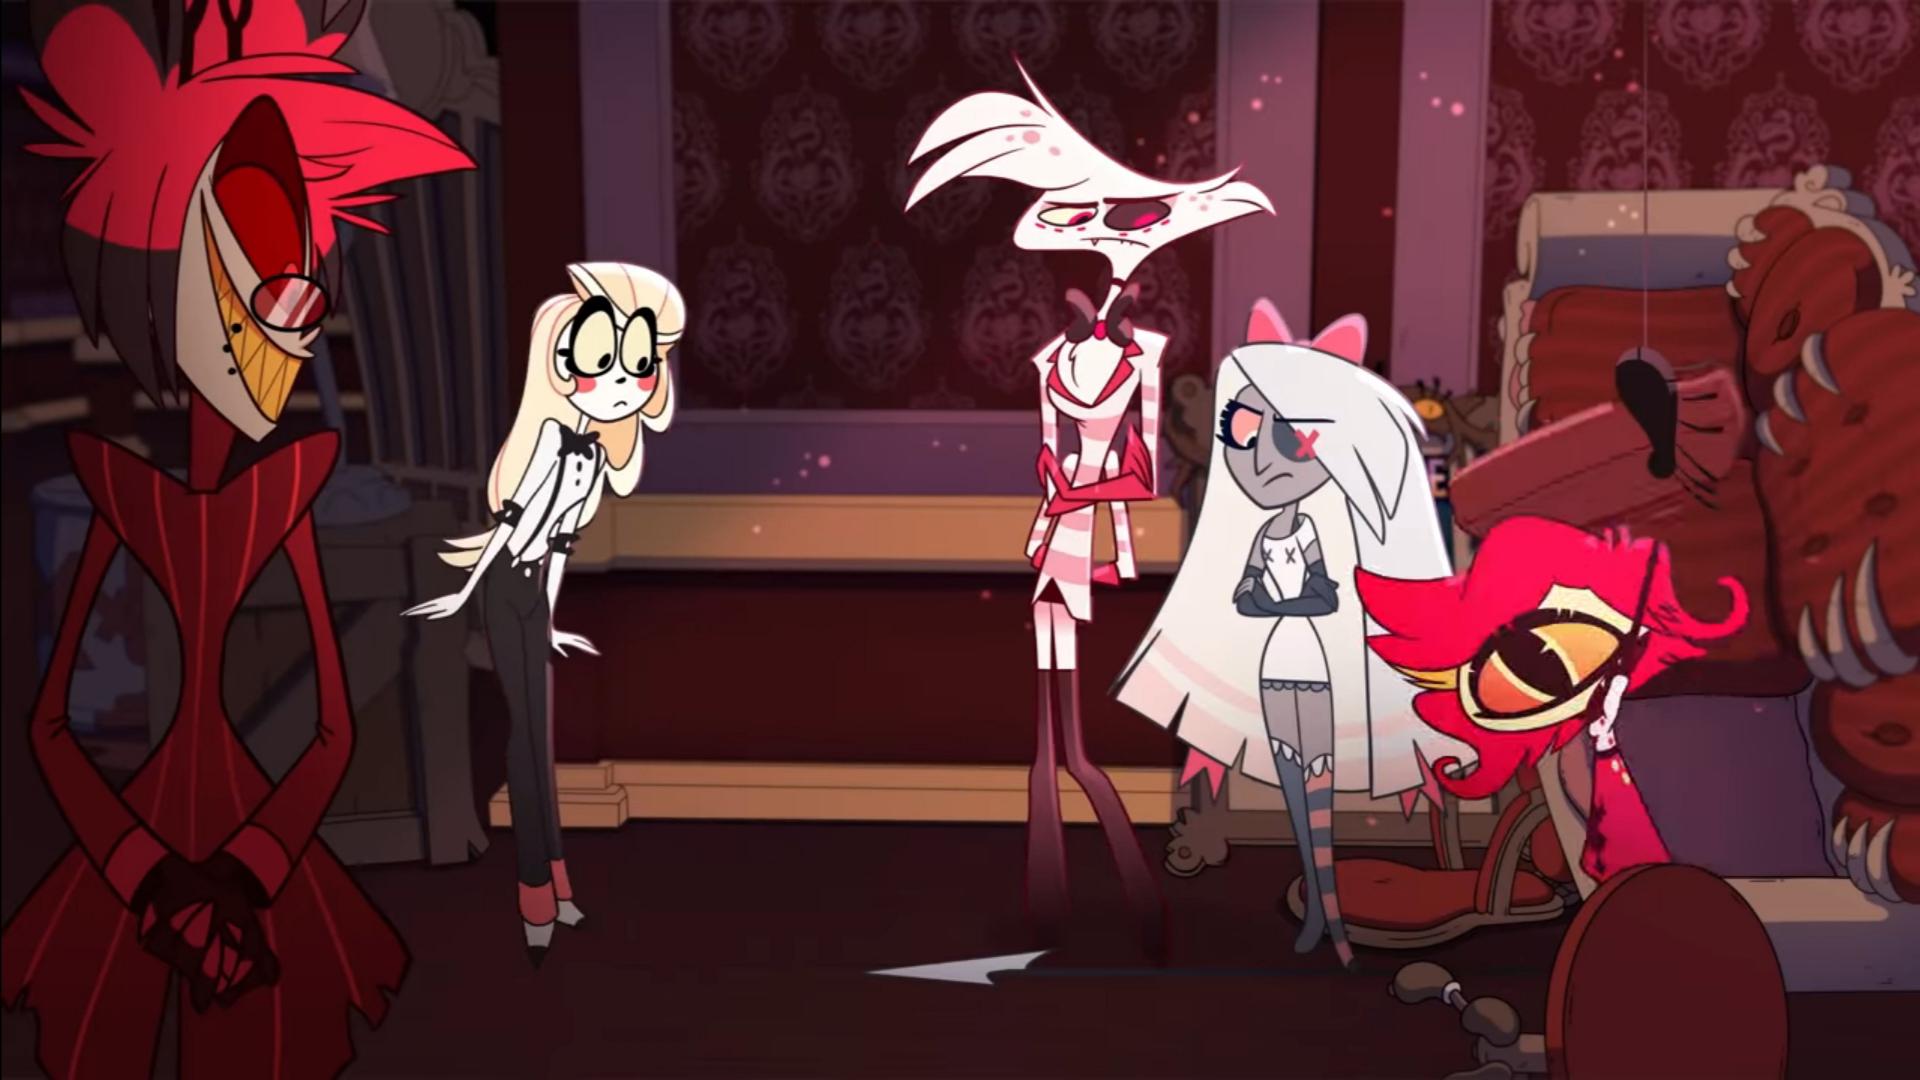 In a post I made earlier some one assumed I made Nifty dab, but I didn't, rather it was just my 4th favorite Hazbin screenshot